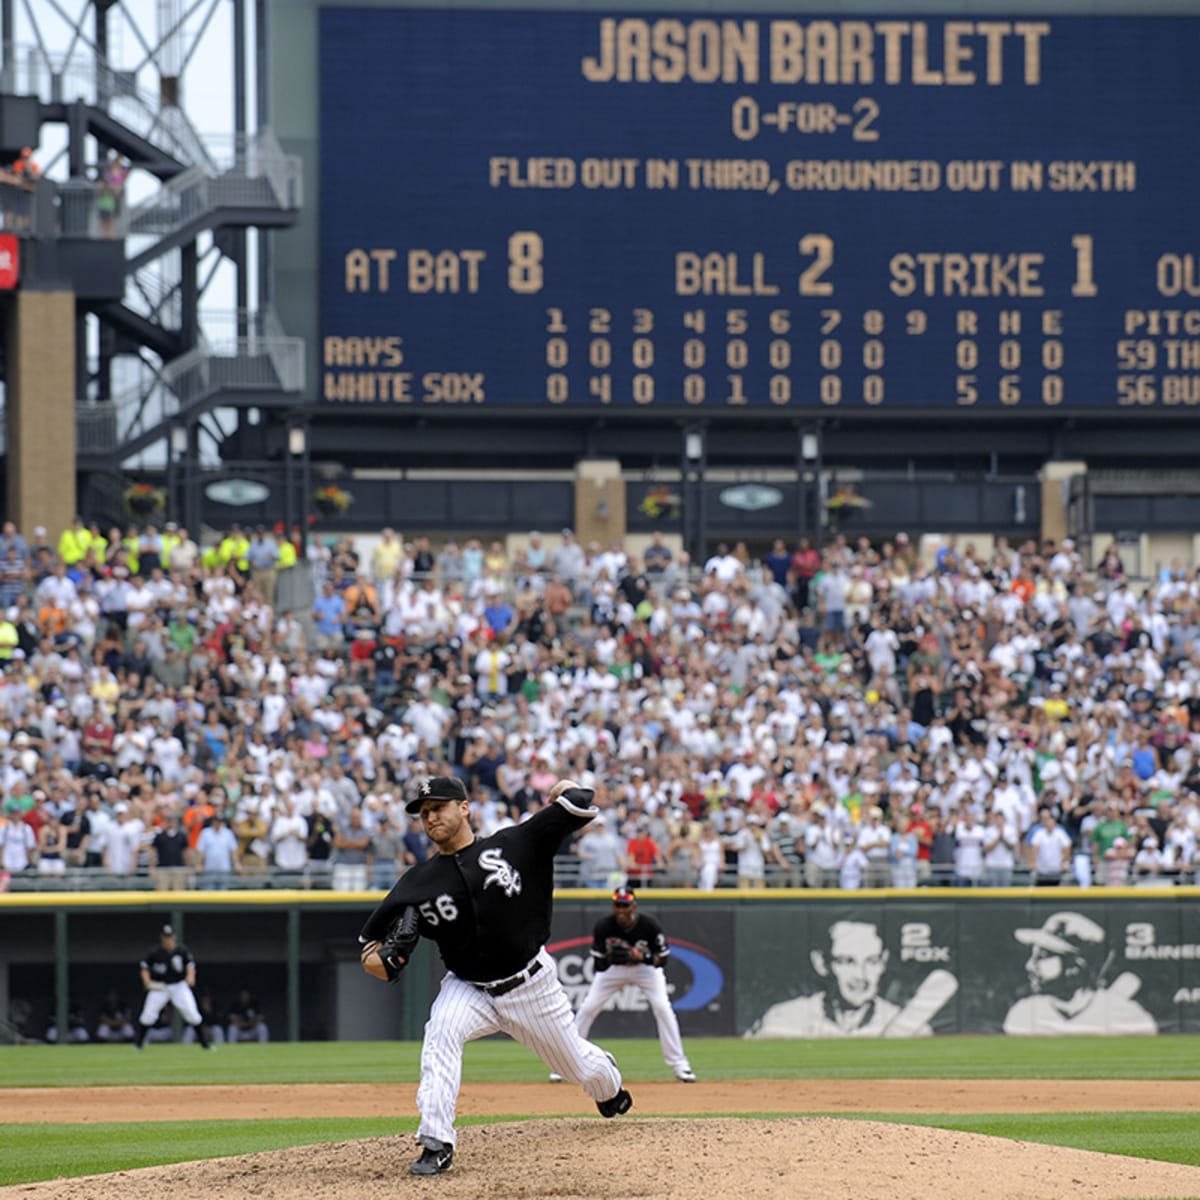 White Sox retire former star pitcher Mark Buehrle's No. 56 jersey